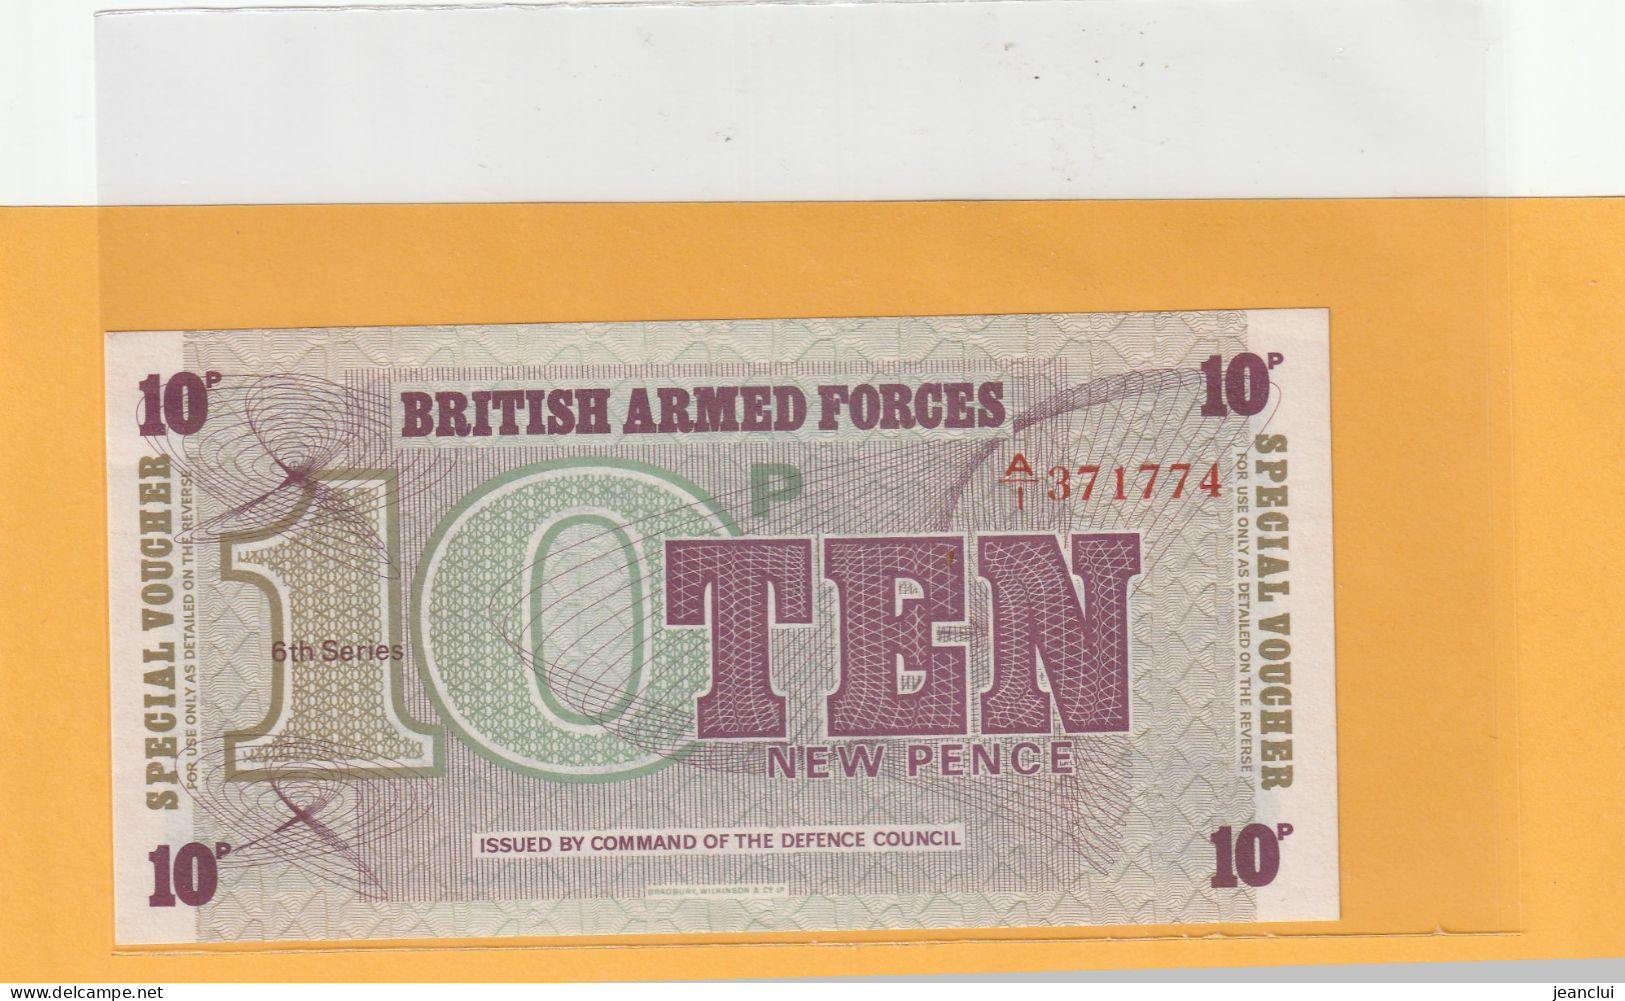 BRITISH ARMED FORCES . SPECIAL VOUCHERS  .  10 NEW PENCE  .  6th SERIES  .  N° A/1 371774  .UNC  .  2 SCANES - British Troepen & Speciale Documenten